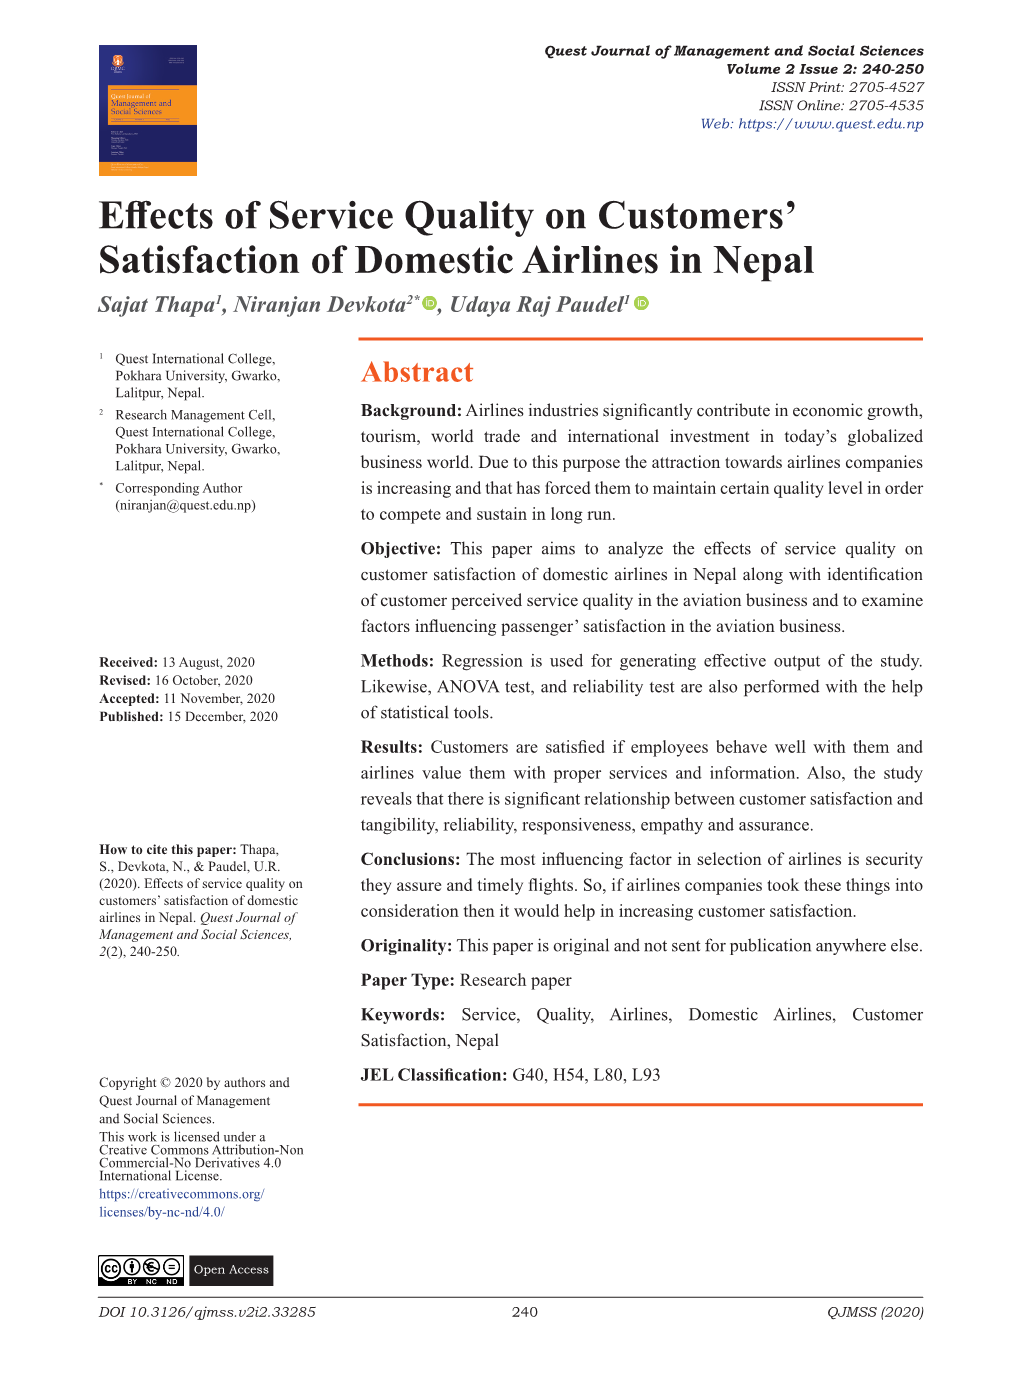 Effects of Service Quality on Customers' Satisfaction of Domestic